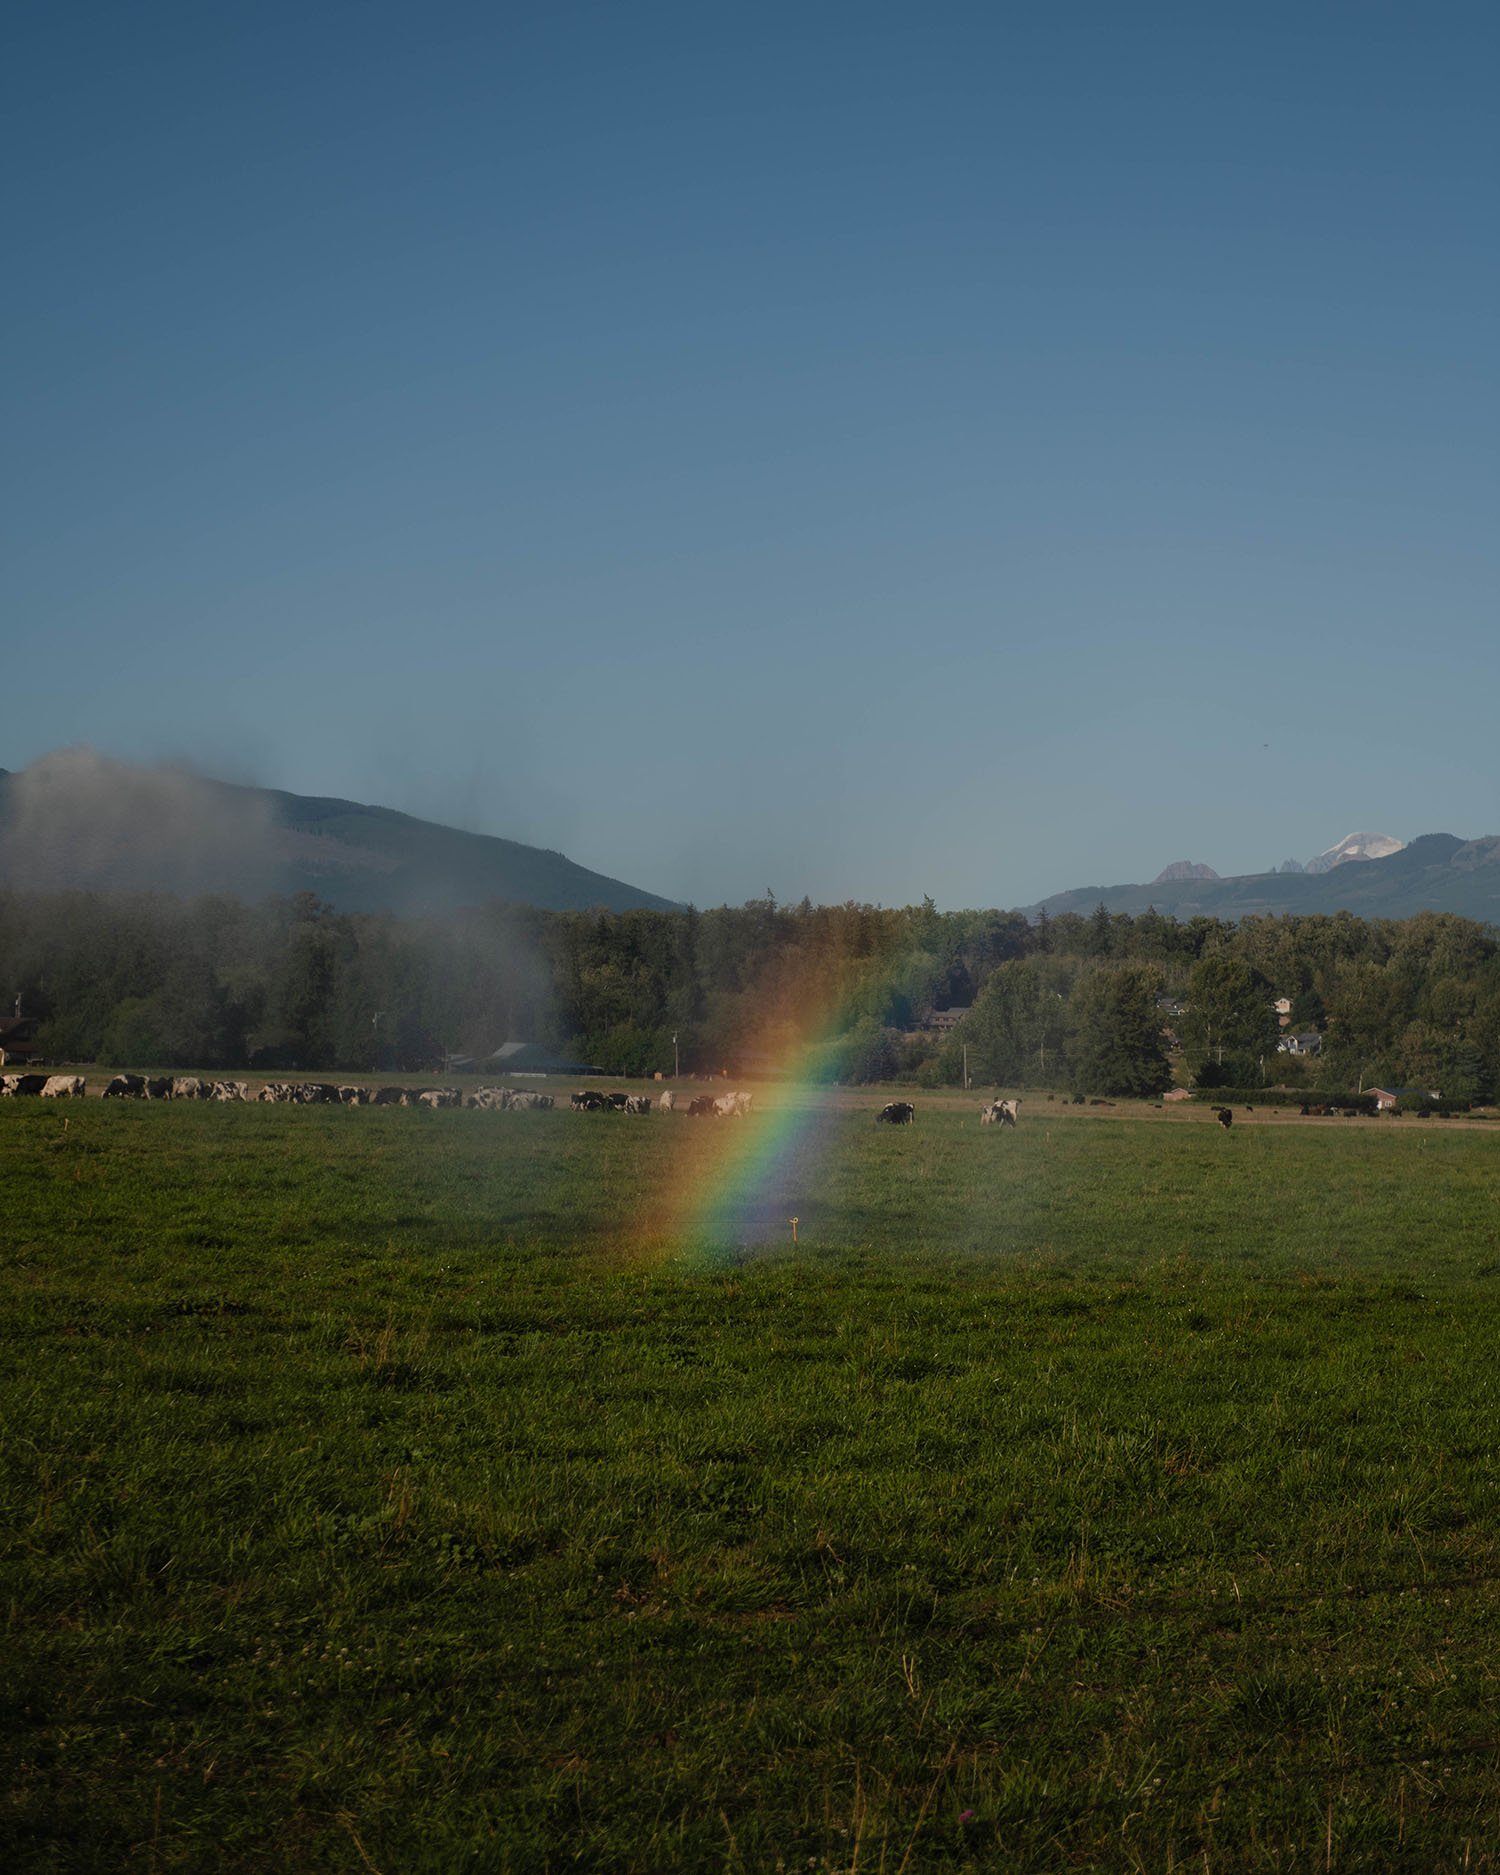 A small rainbow is seen in a cow field in Washington.